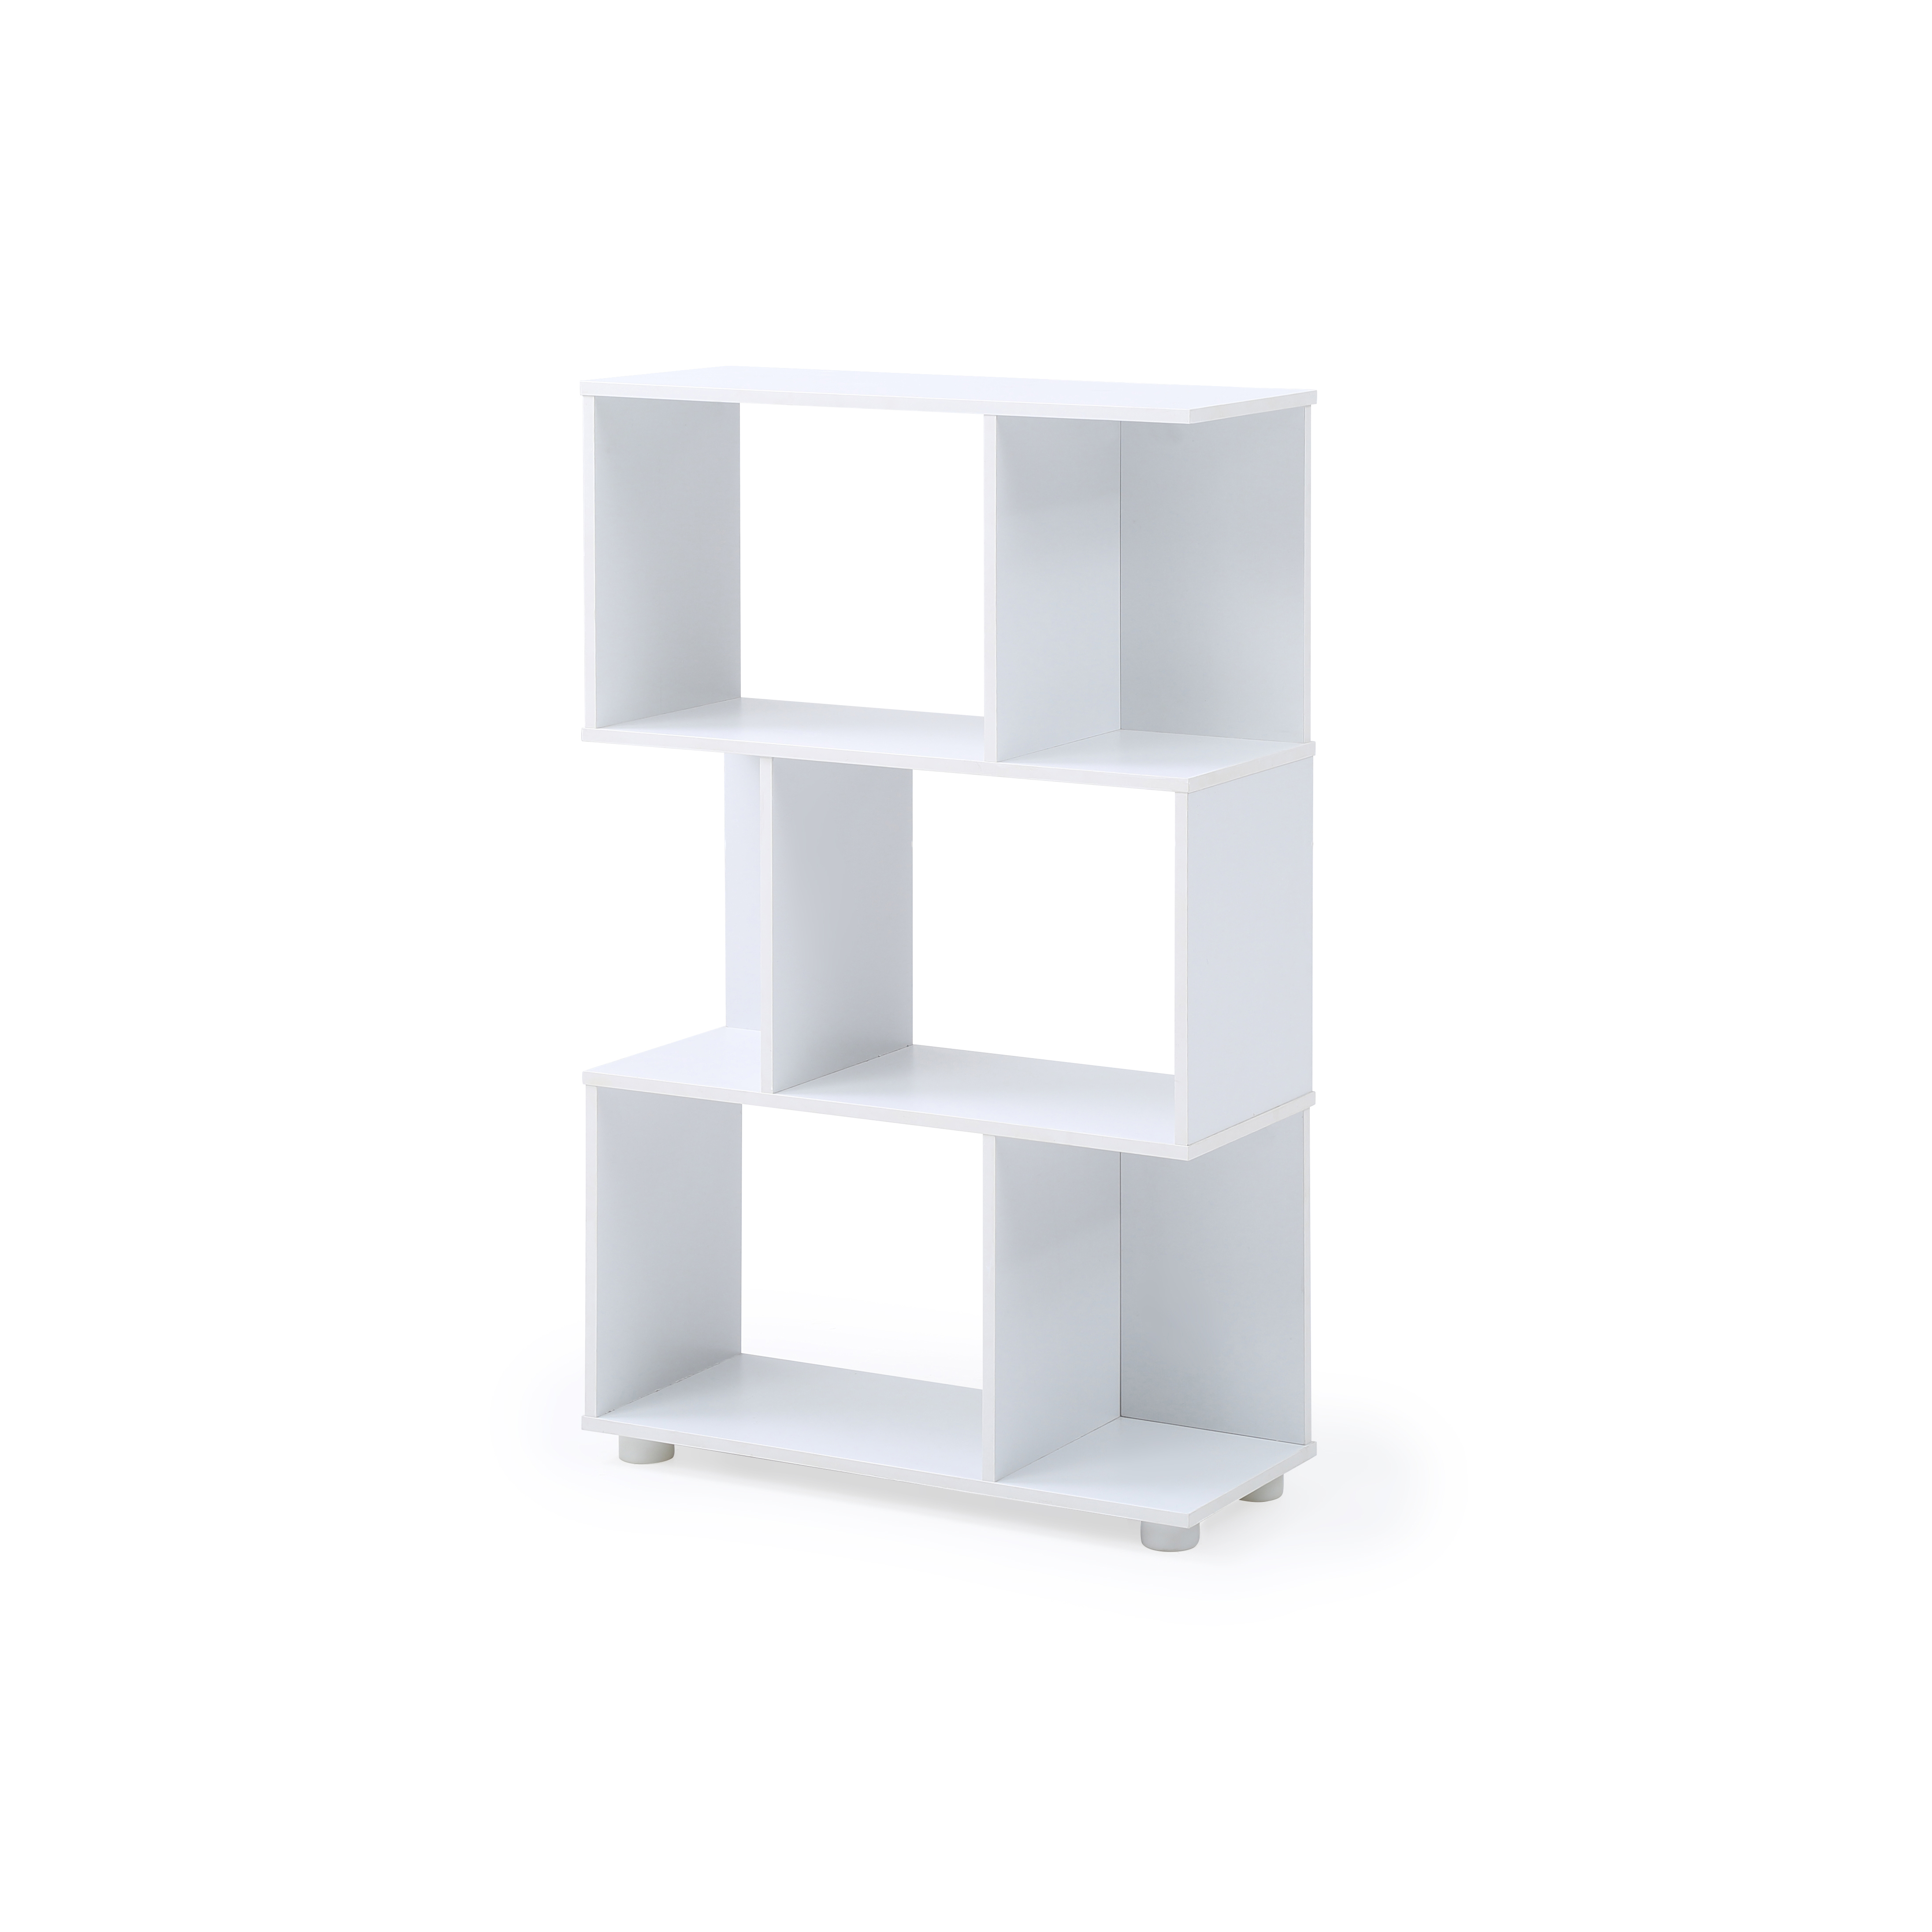 Modern Staggered 3 Shelf Manor Bookcase, Staggered Shelves Bookcase